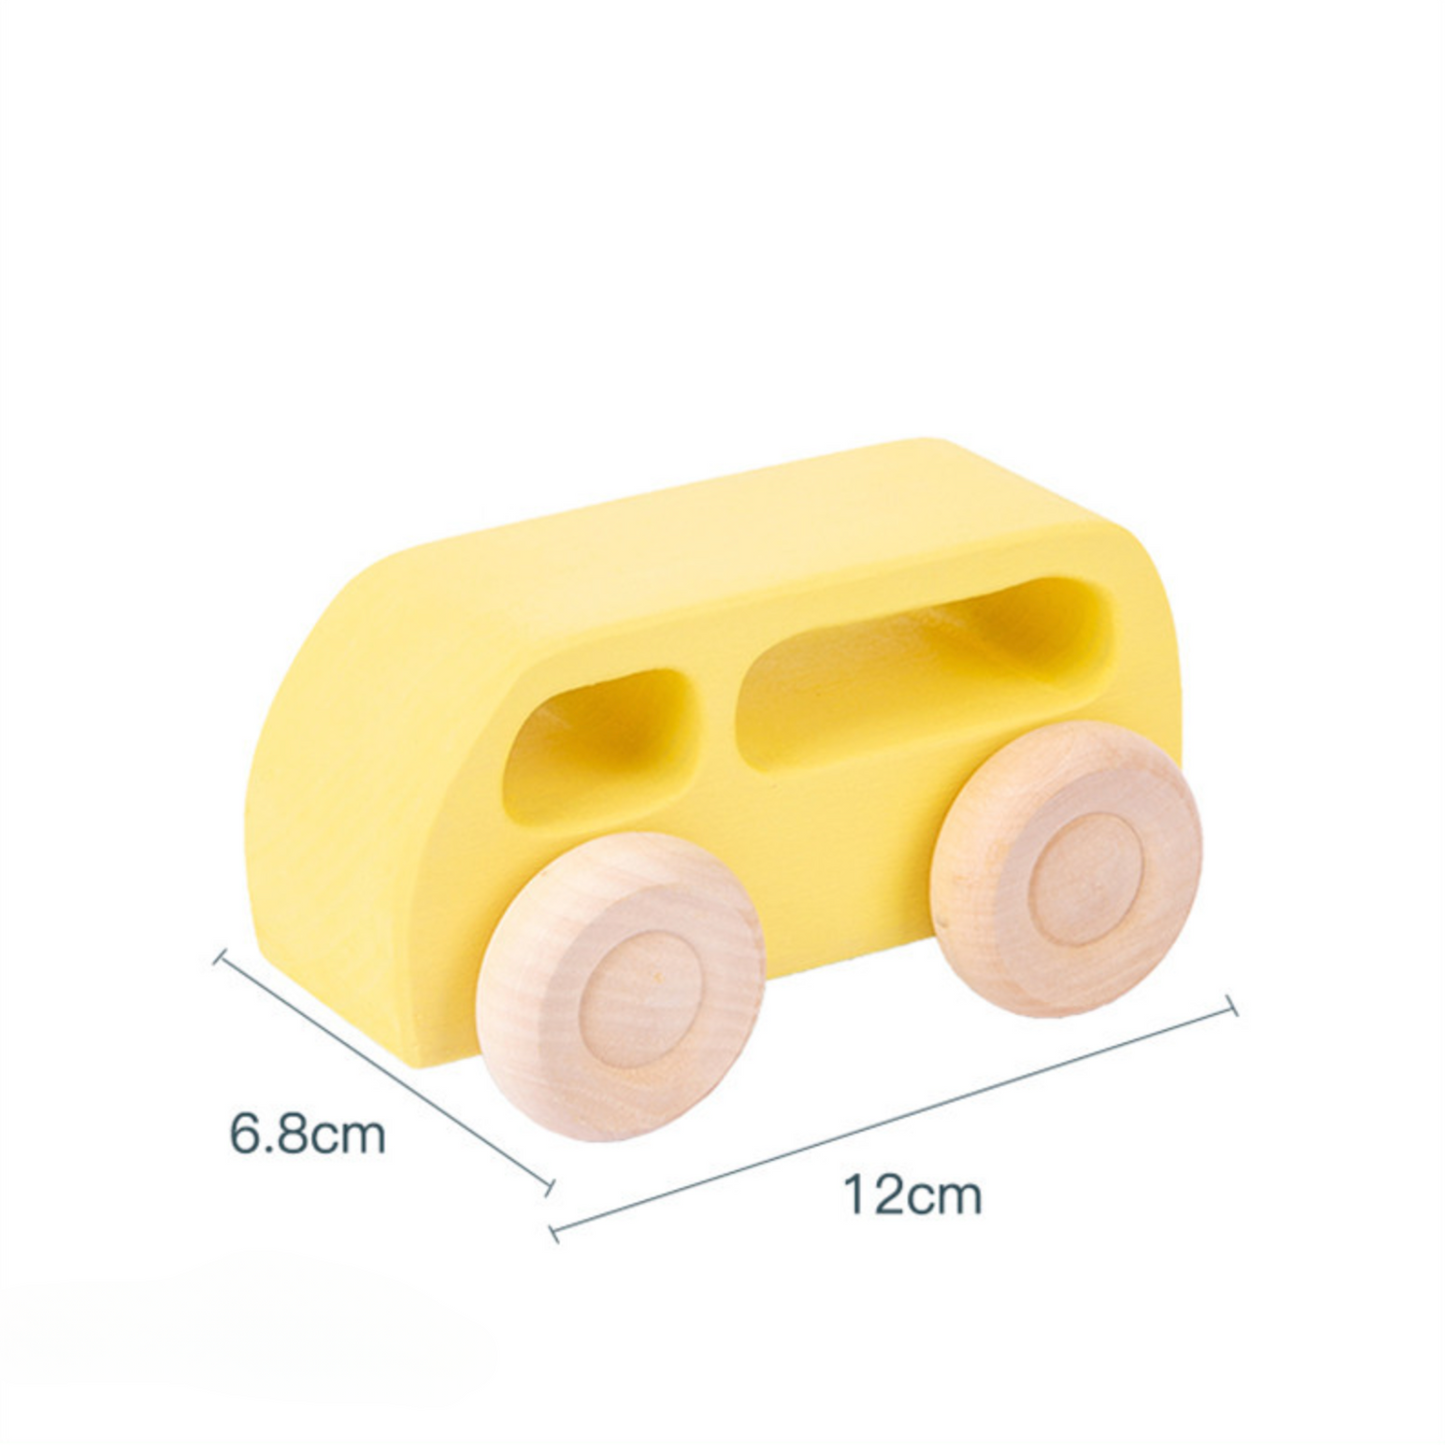 Prism Play Wooden Convertible - Yellow